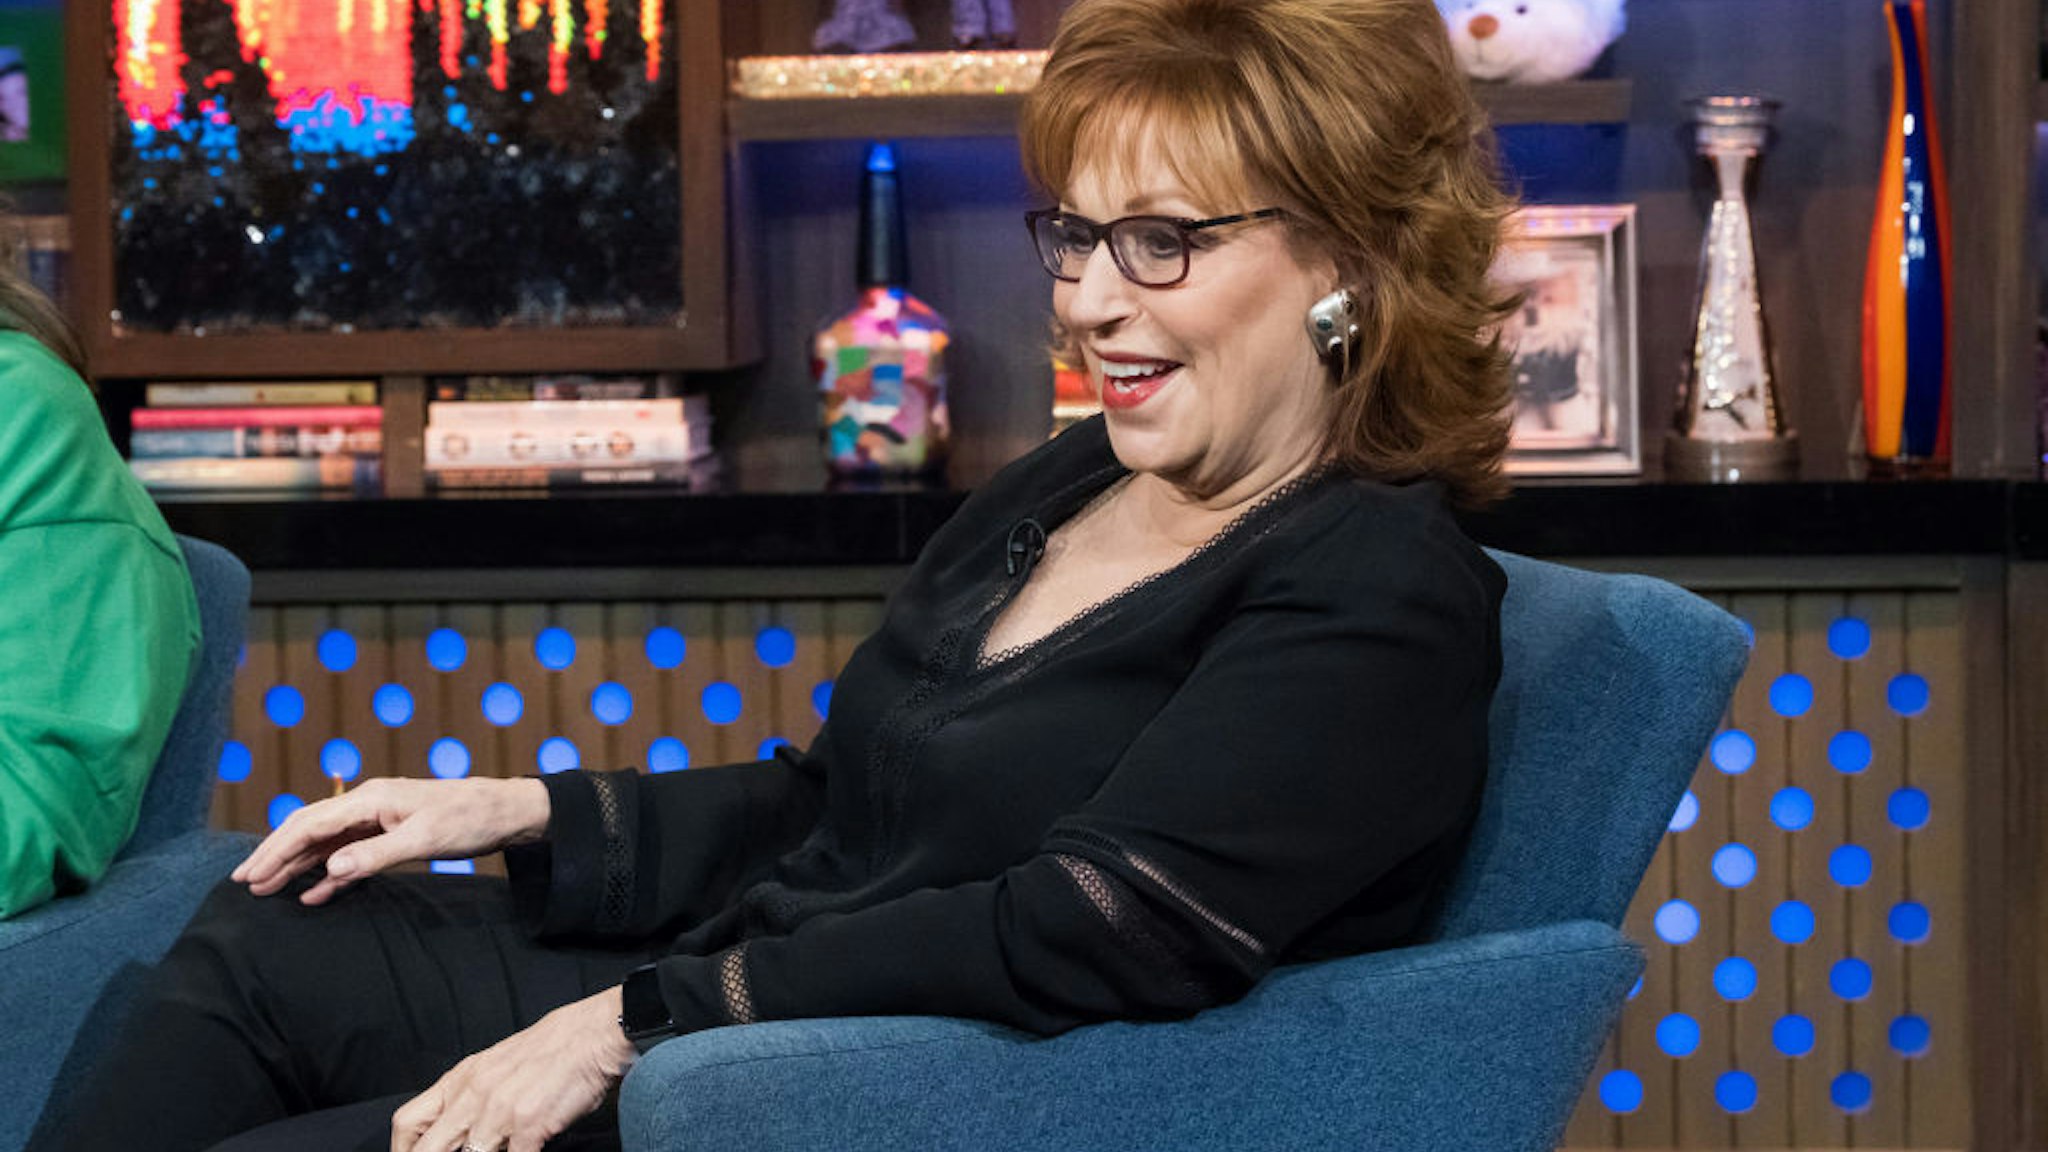 WATCH WHAT HAPPENS LIVE WITH ANDY COHEN -- Pictured: Joy Behar -- (Photo by: Charles Sykes/Bravo/NBCU Photo Bank/NBCUniversal via Getty Images)